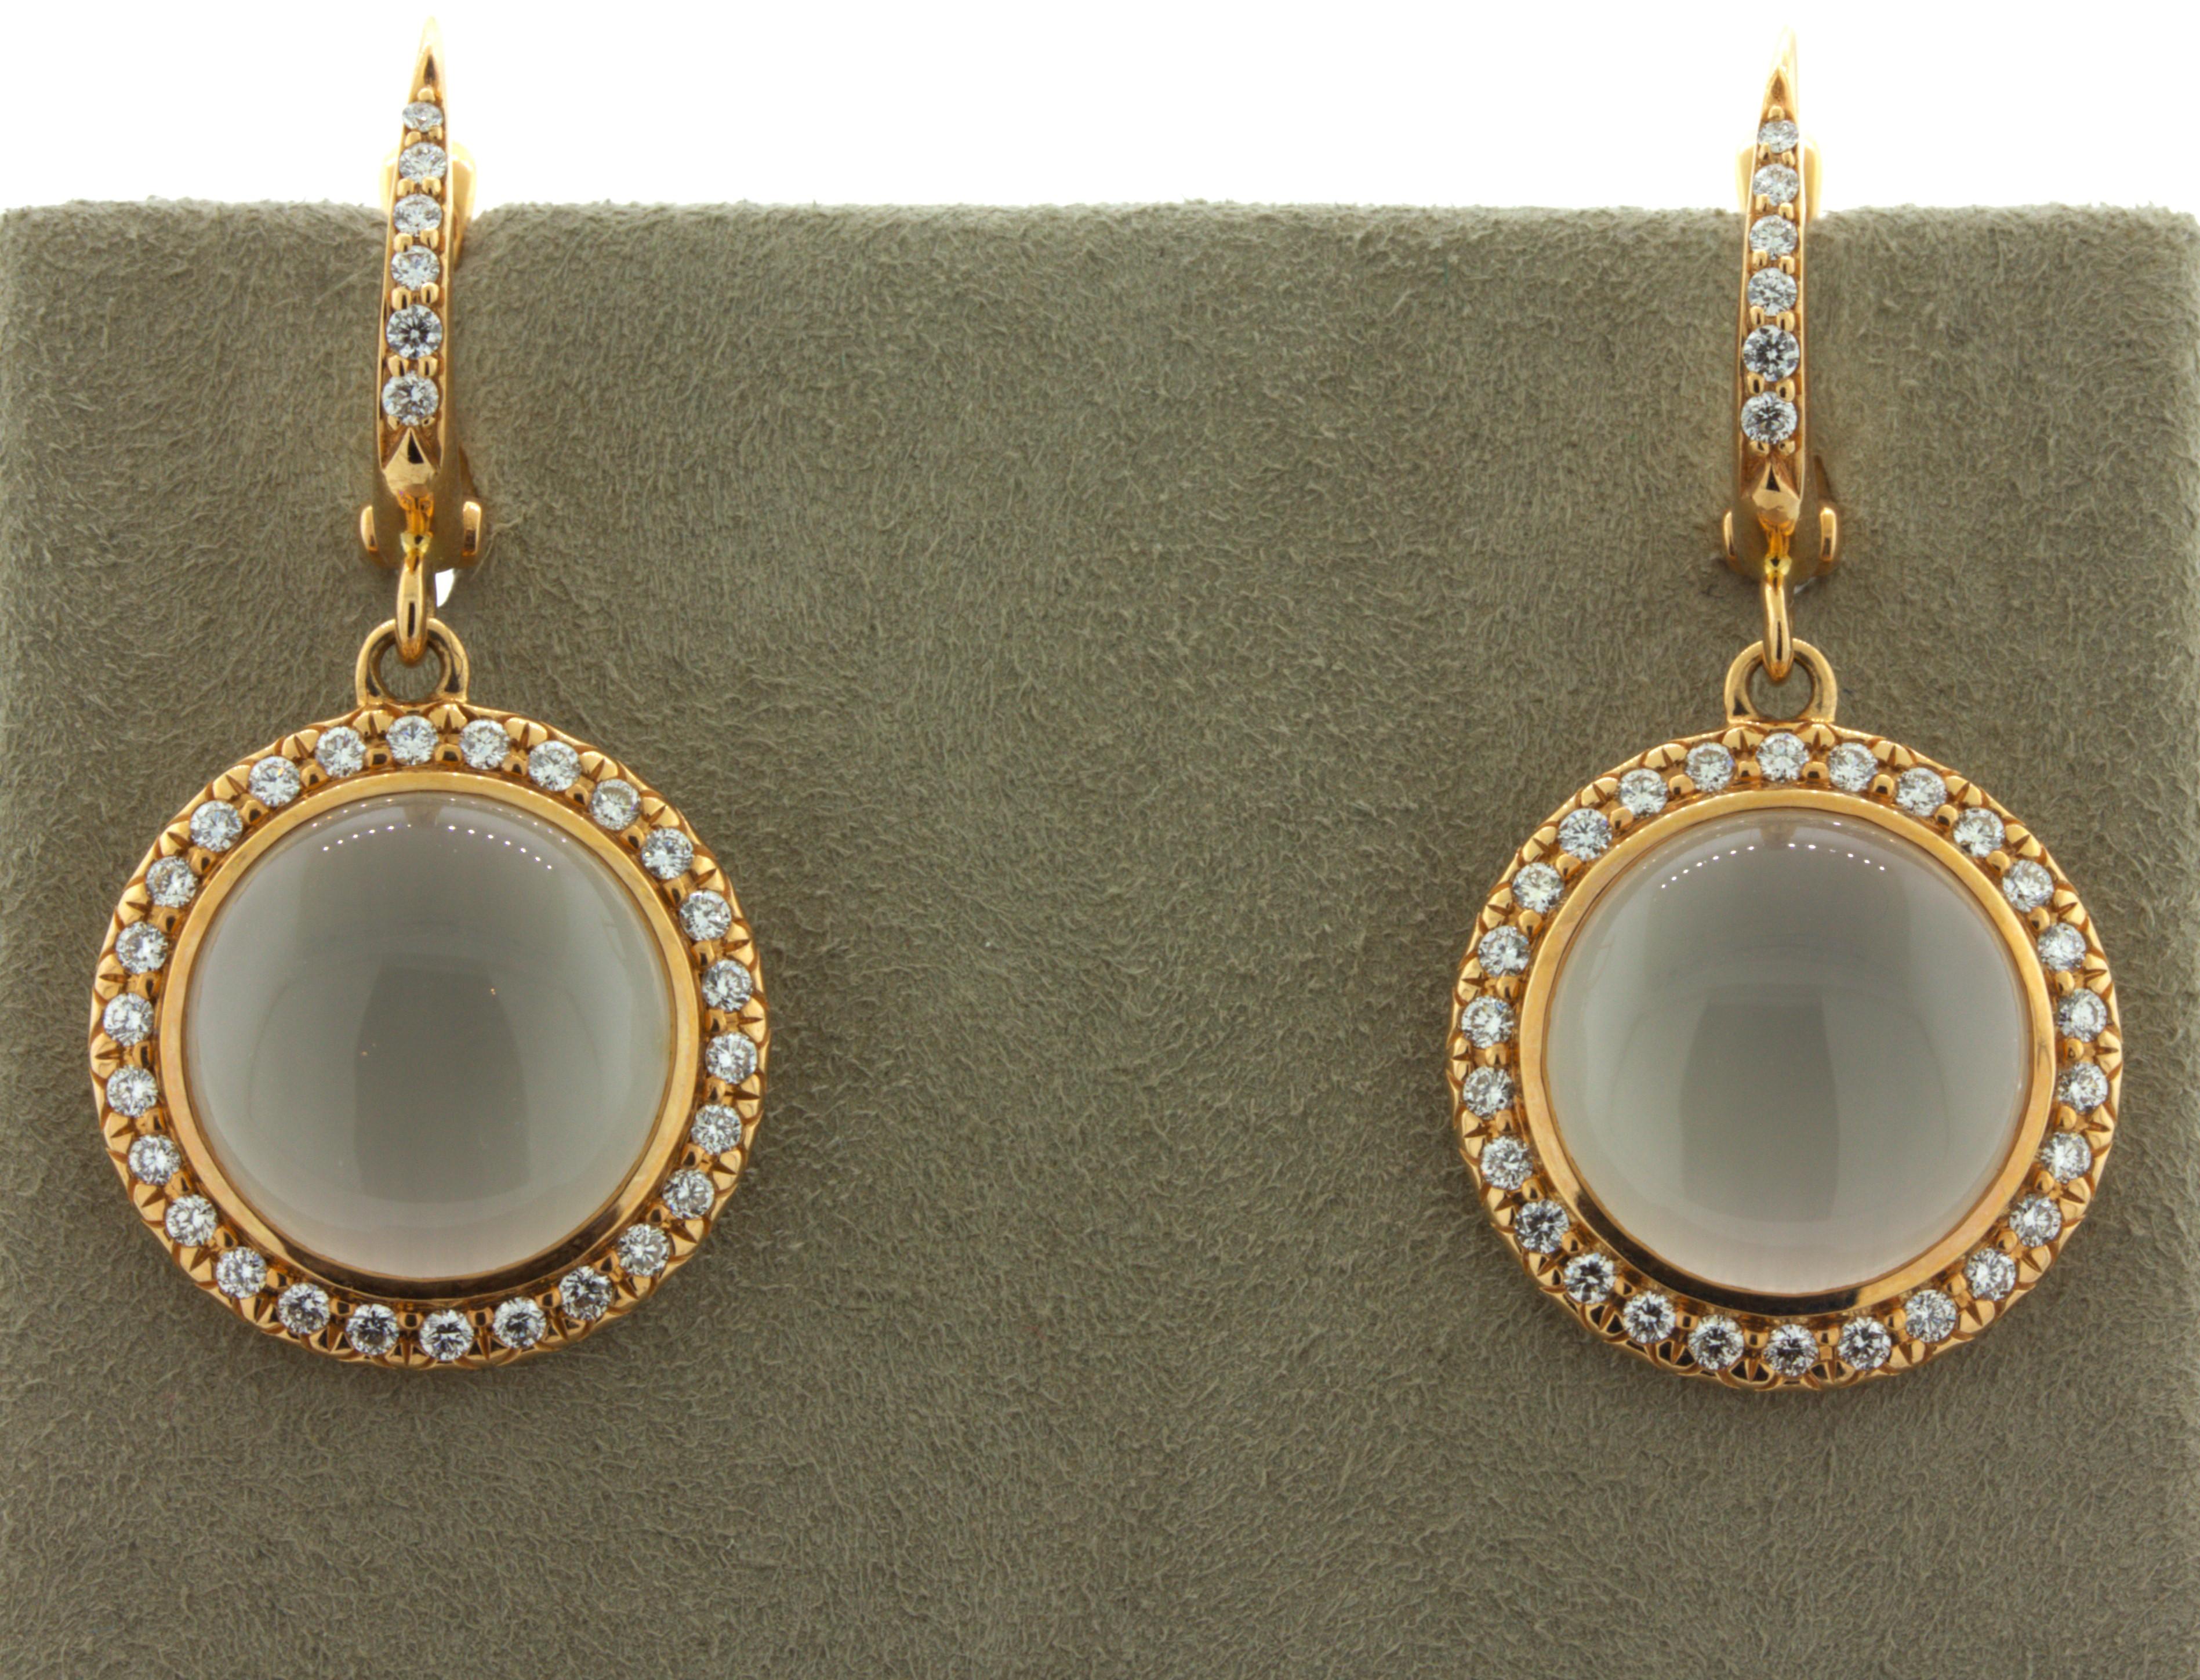 Moonstone Diamond 18k Rose Gold Drop Earrings

A sweet and stylish pair of rose gold moonstone earrings! They feature 2 cabochon moonstones weighing approximately 6 carats with a fine polish and white glow. They are surrounded by 1.08 carats of